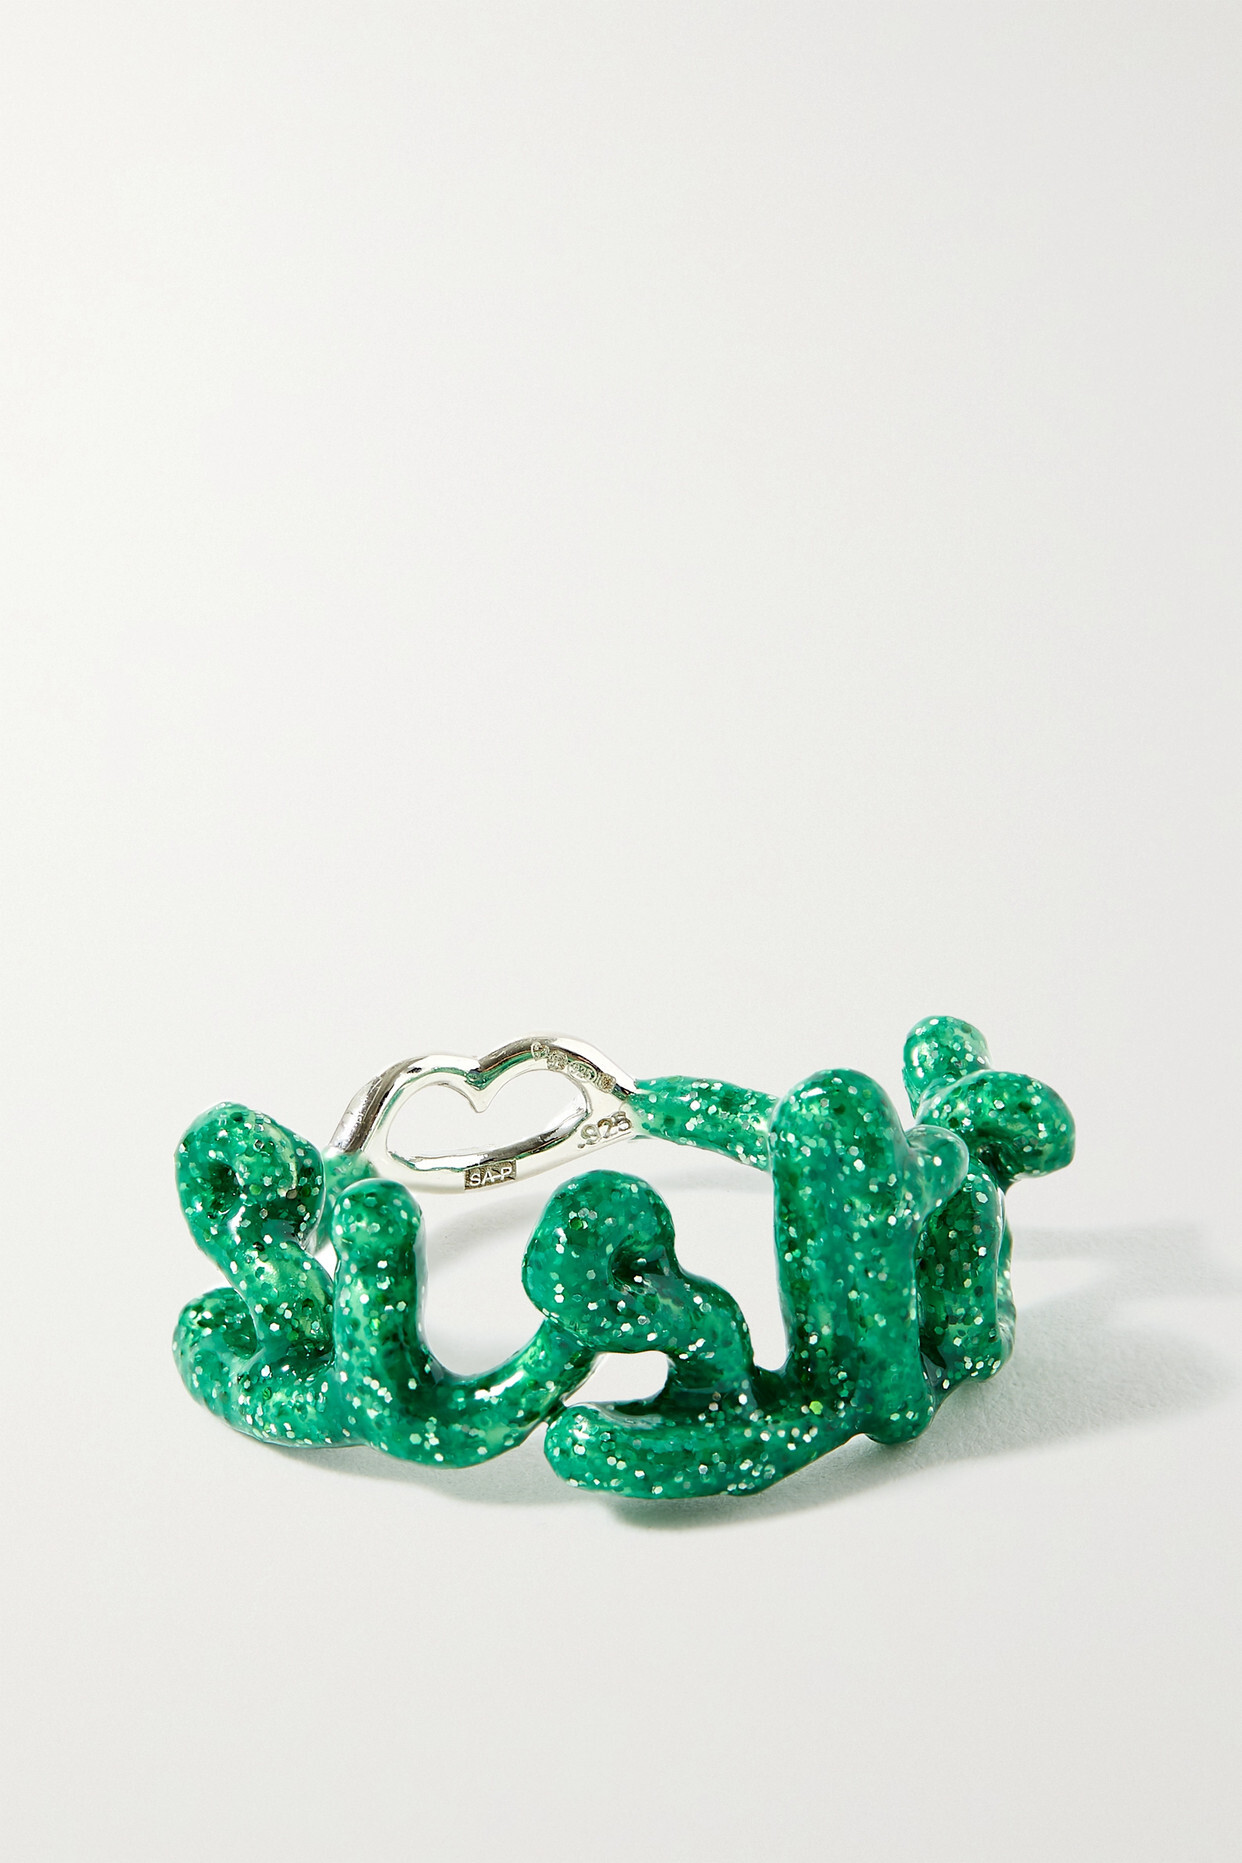 Hotlips - Sister Recycled Silver And Glittered Enamel Ring - Green